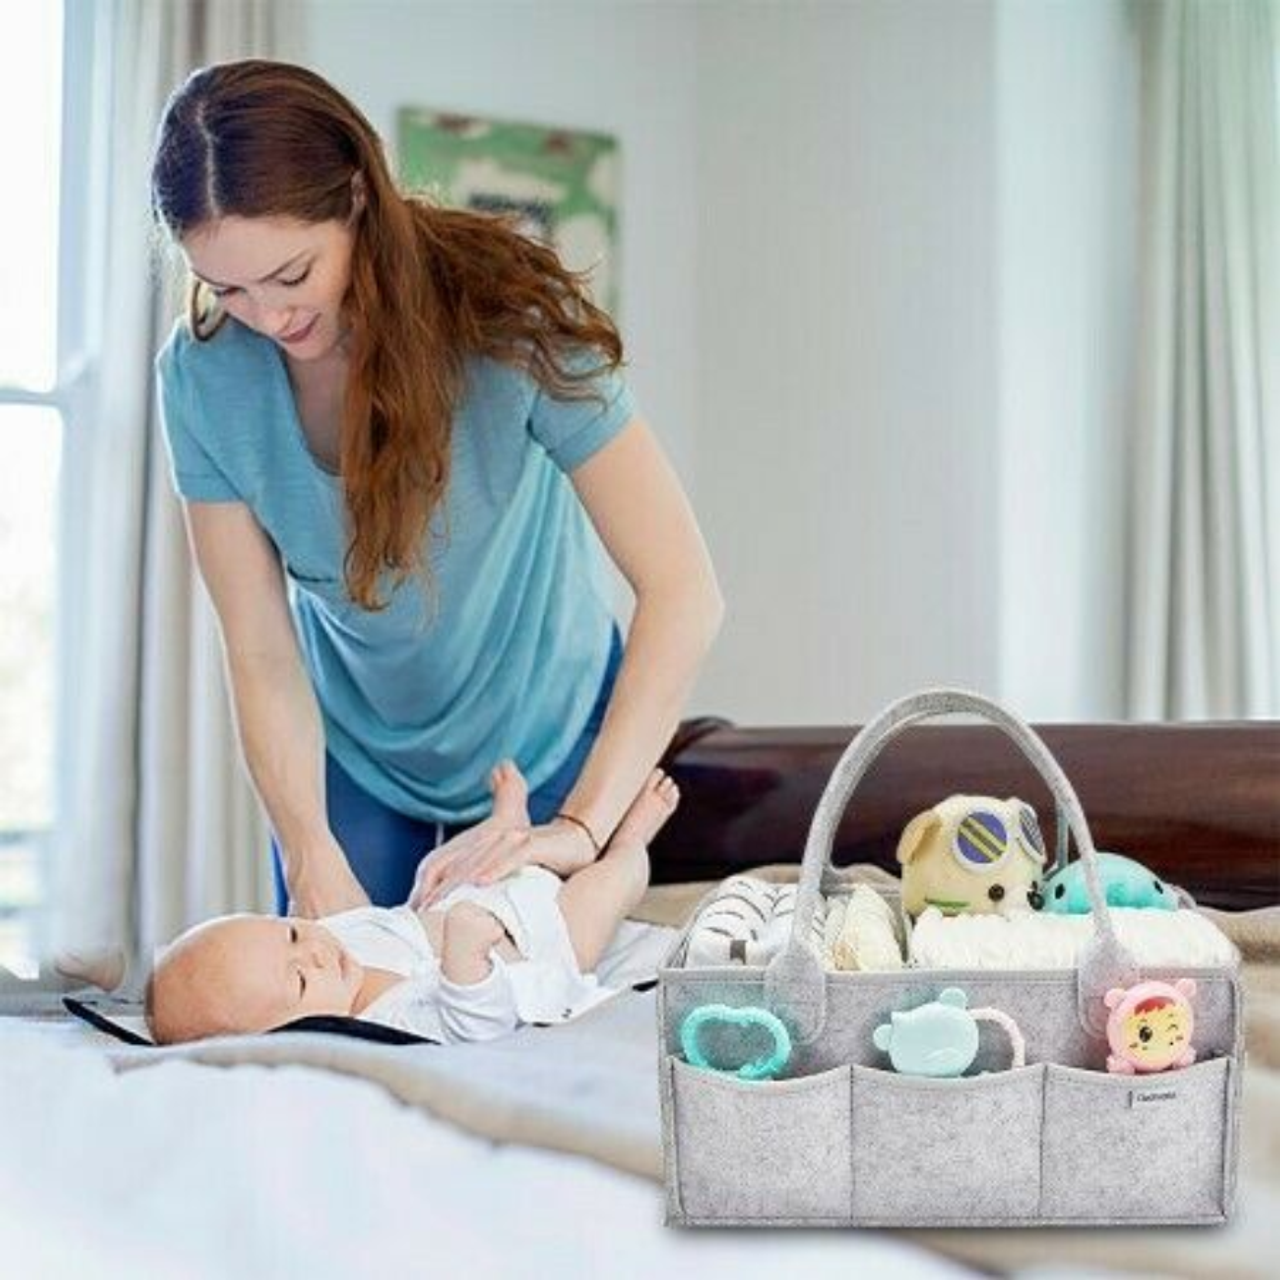 Clearworld® Baby Diaper Caddy Organizer product image